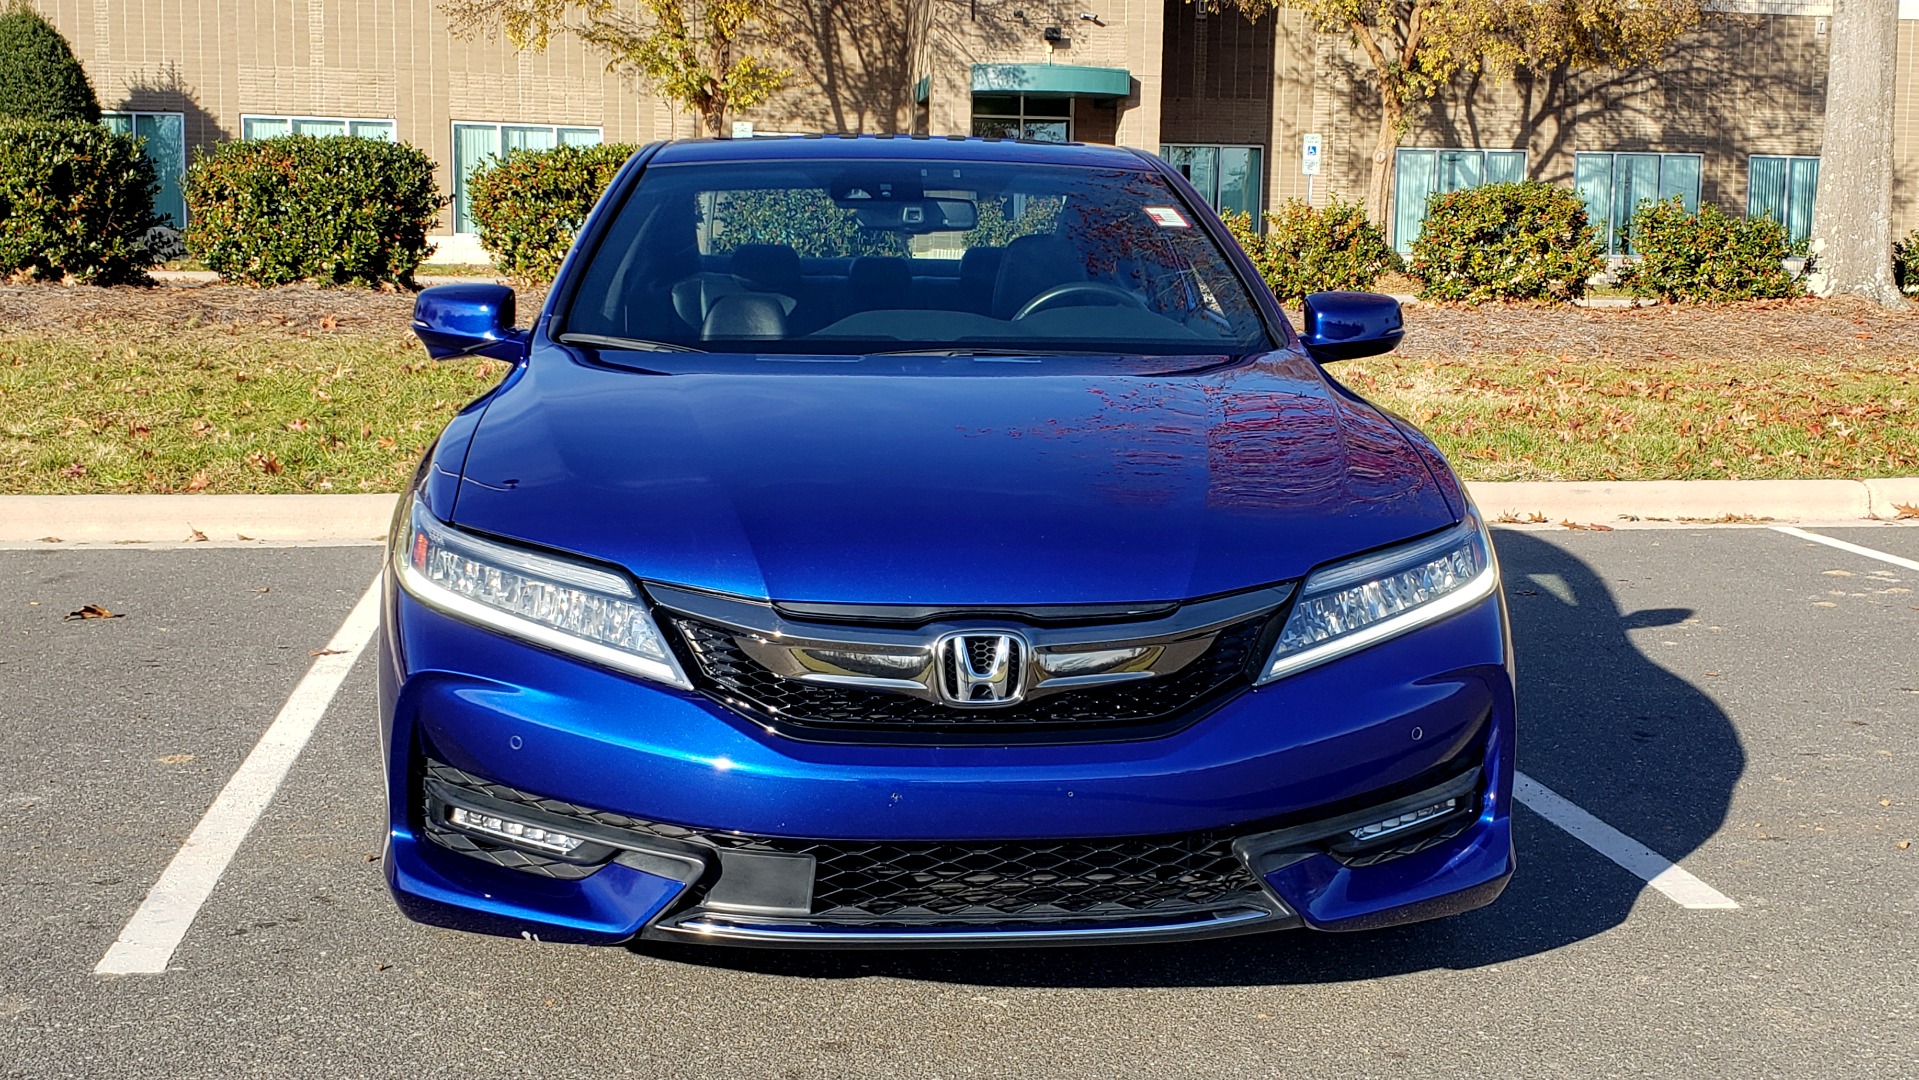 Used 2017 Honda ACCORD COUPE TOURING V6 / 2-DR / NAV / SUNROOF / LANEWATCH / CMBS for sale Sold at Formula Imports in Charlotte NC 28227 23